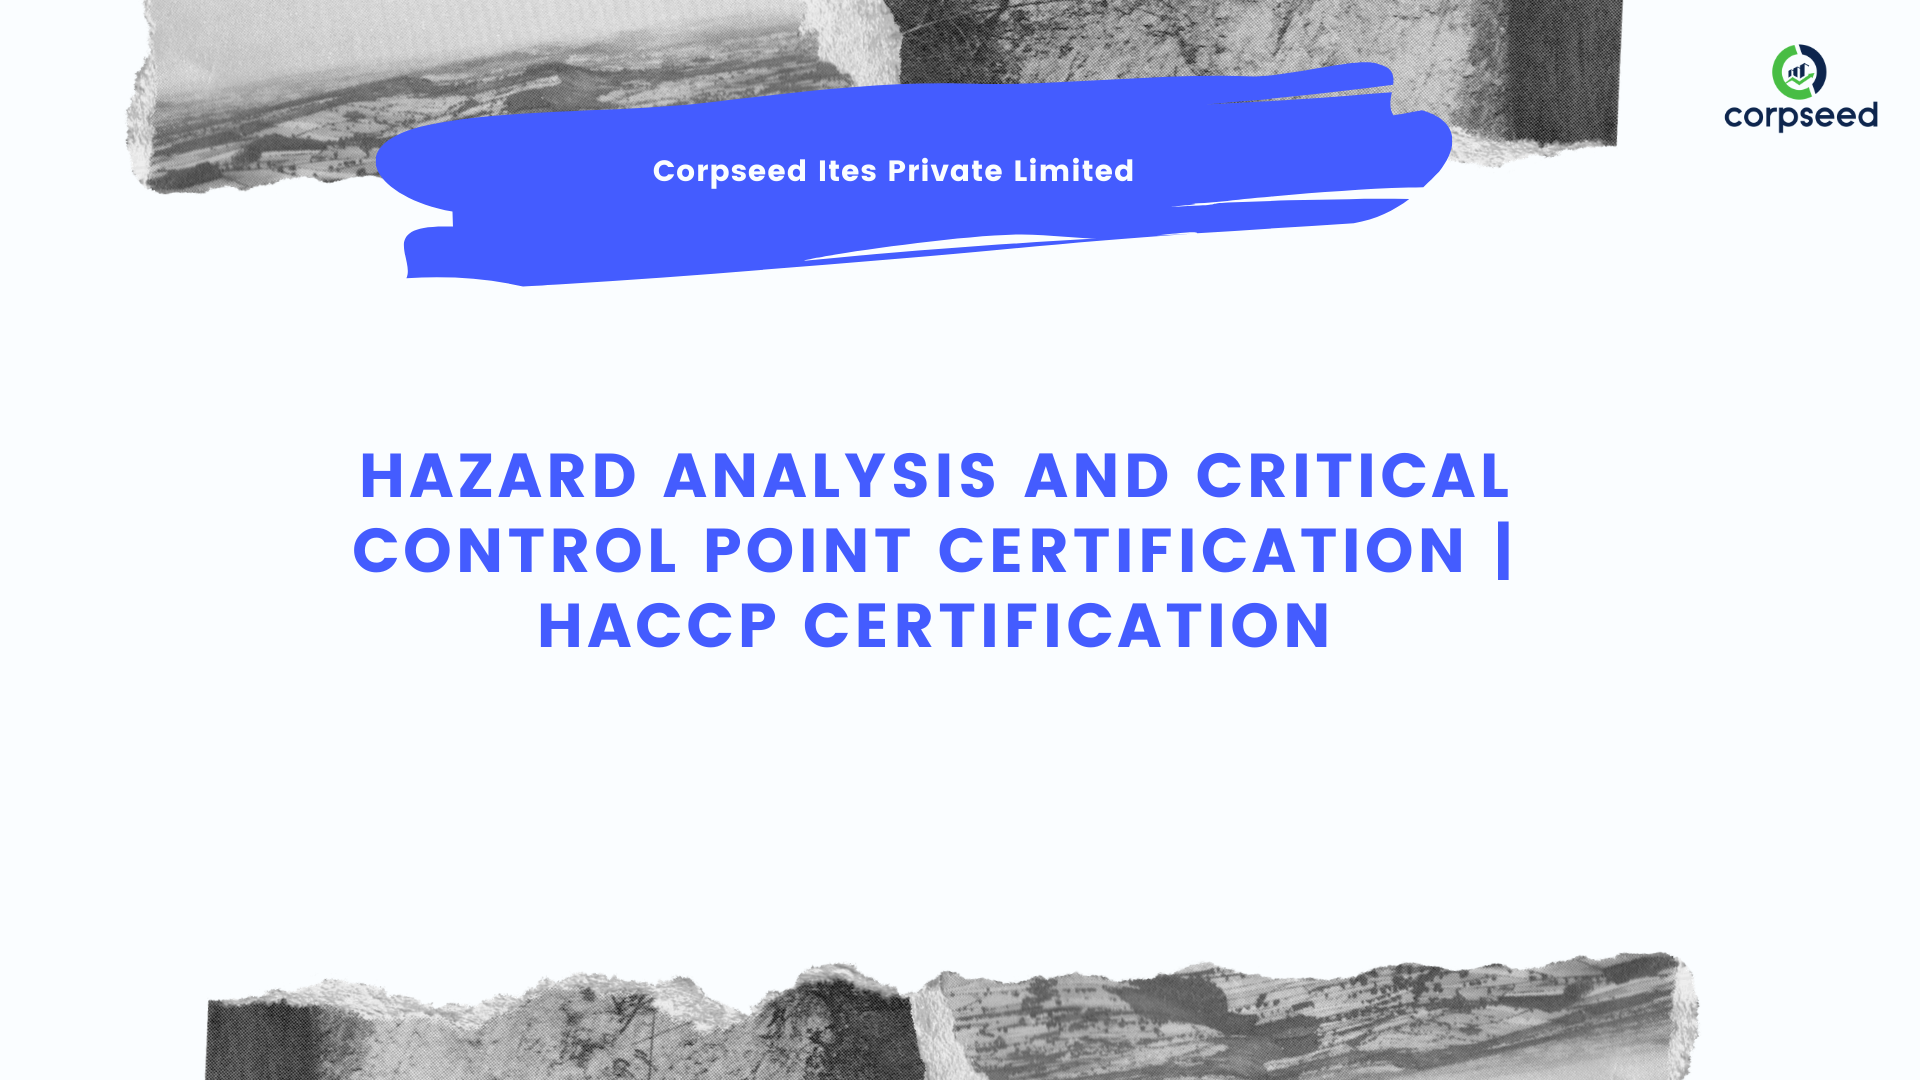 Hazard Analysis and Critical Control Point Certification  HACCP Certification - Corpseed.png